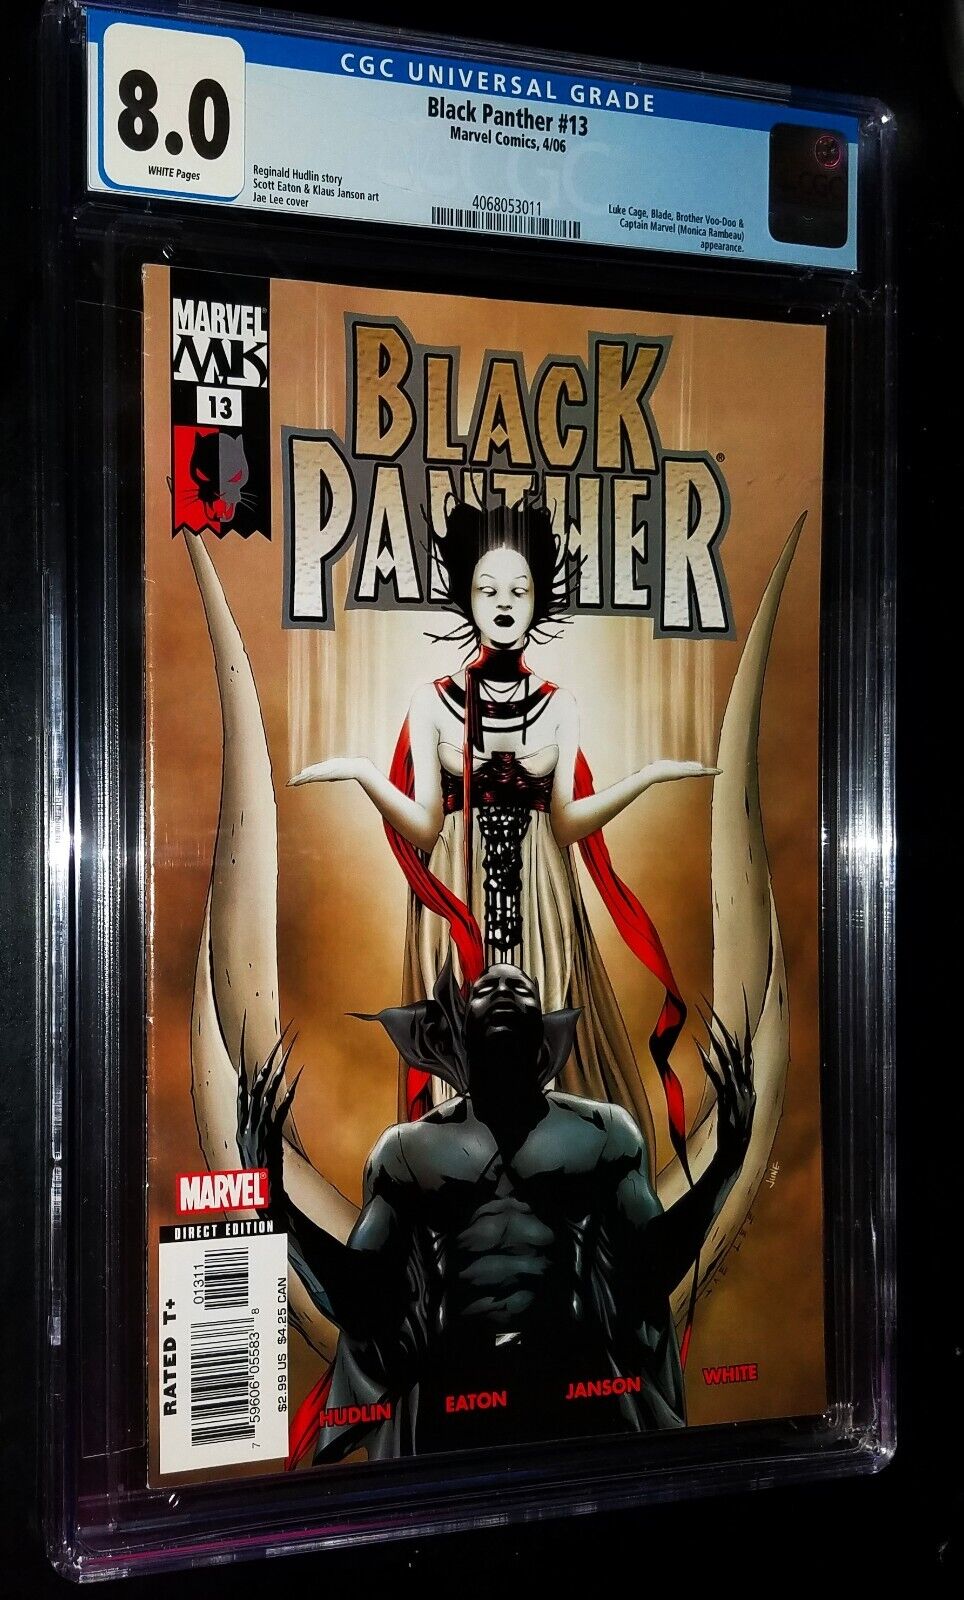 BLACK PANTHER #13 2006 Marvel Comics CGC 8.0 Very Fine White Pages